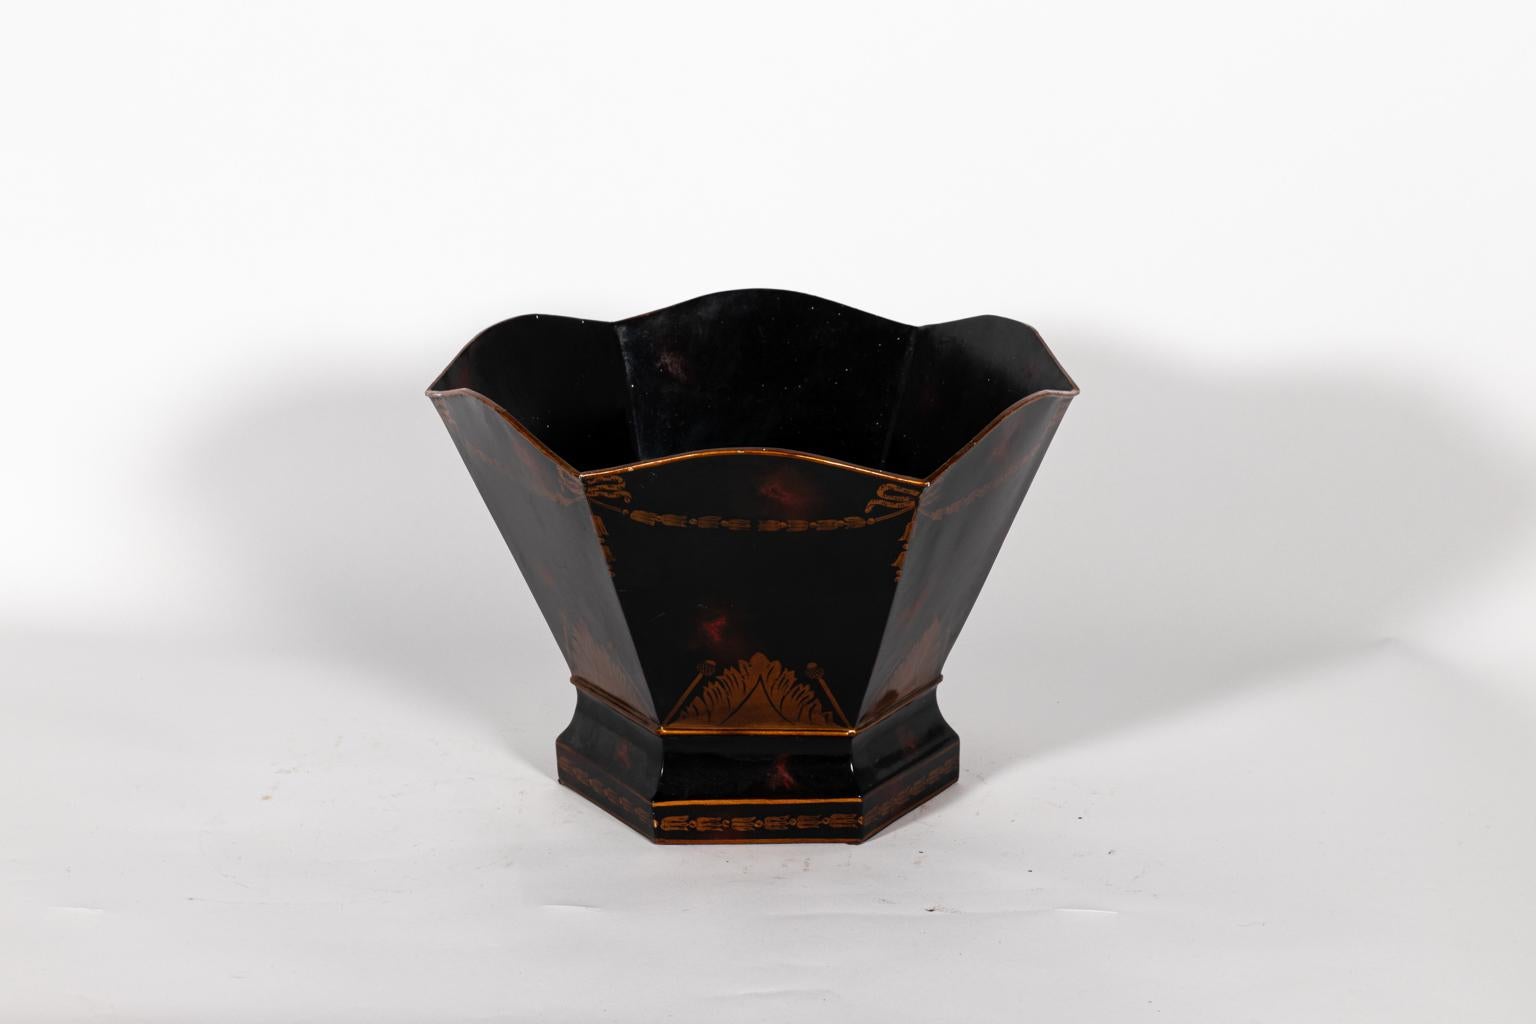 Hand painted cachepot by Maitland Smith. The piece also features scalloped trim and a maker's stamp on the bottom. Please note of wear consistent with age including minor chips and paint loss.